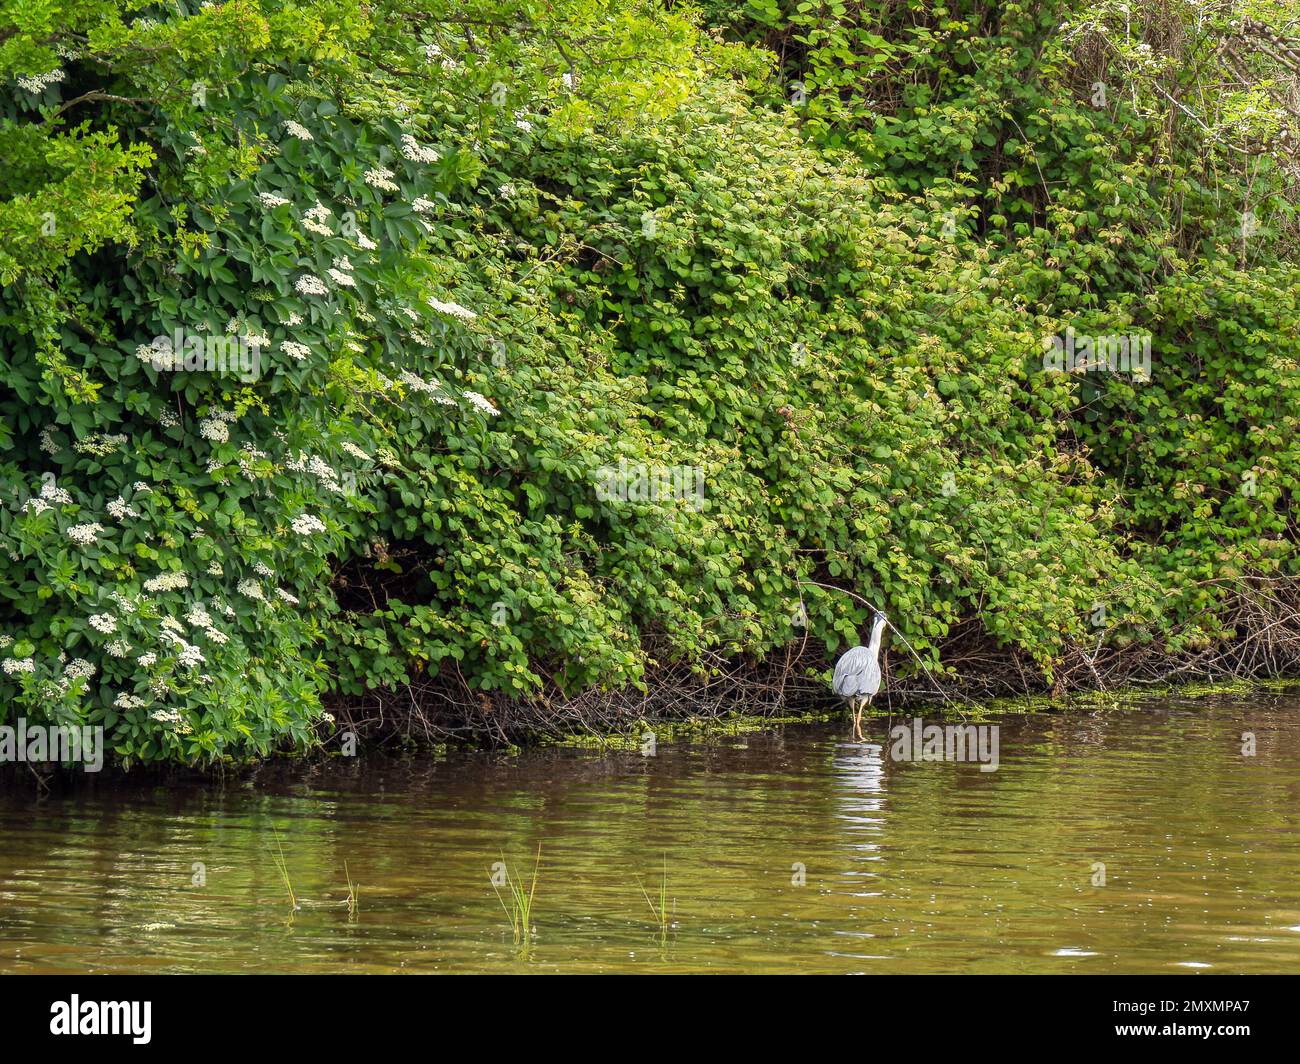 Swampy terrain and bird. The shores of the lake are with vegetation. Wildlife, landscape. A white bird on the water. Stock Photo